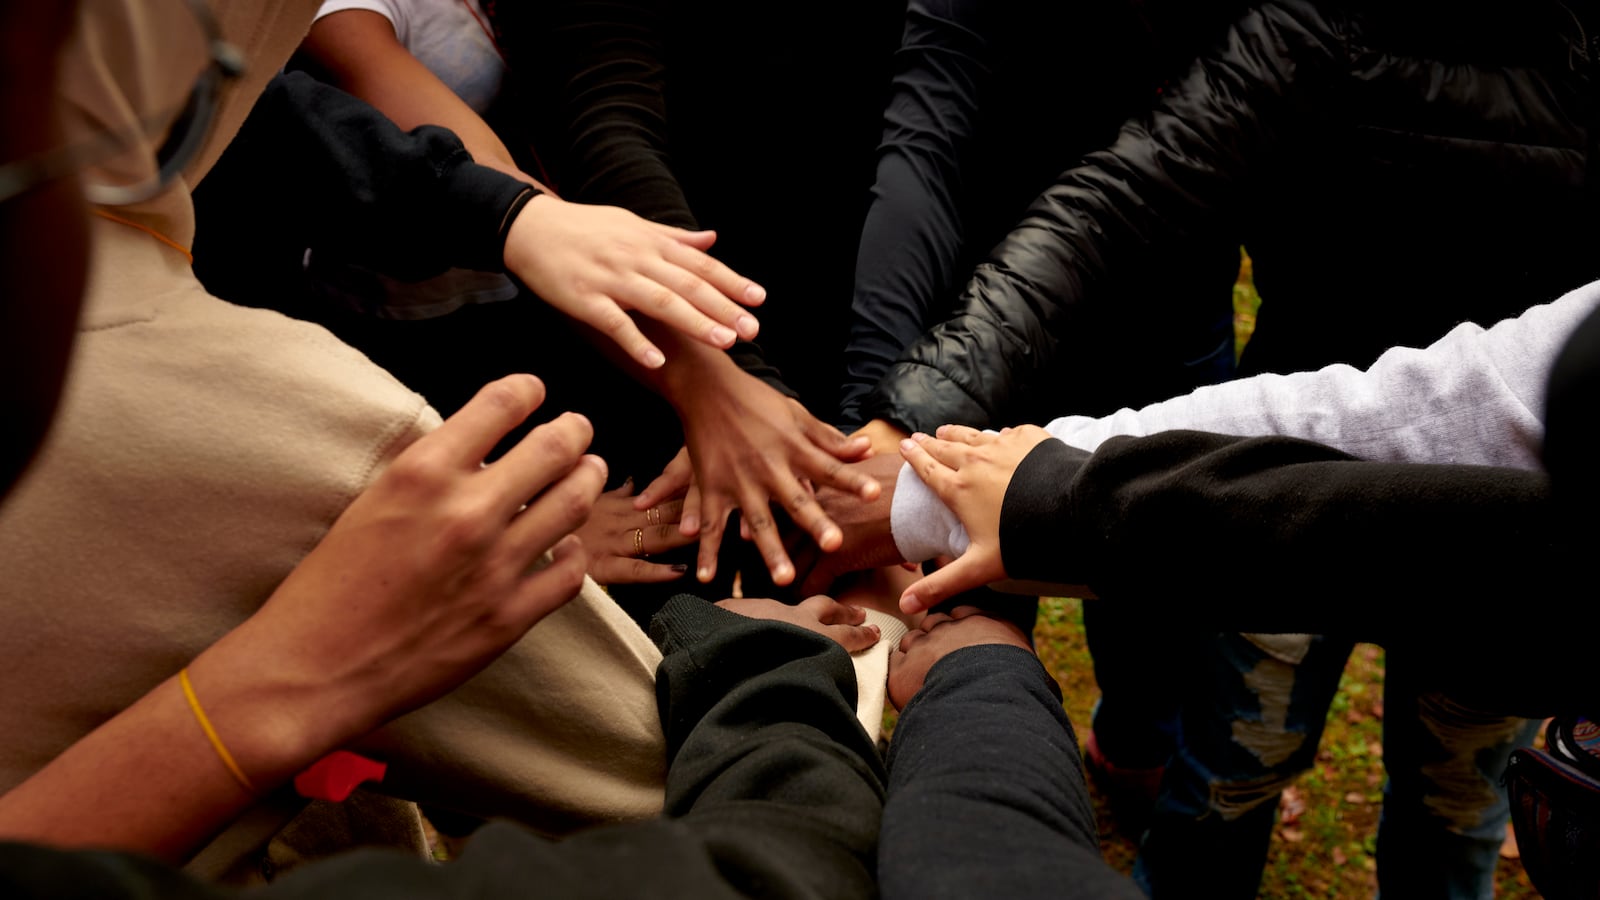 Students put their hands together during an exercise.